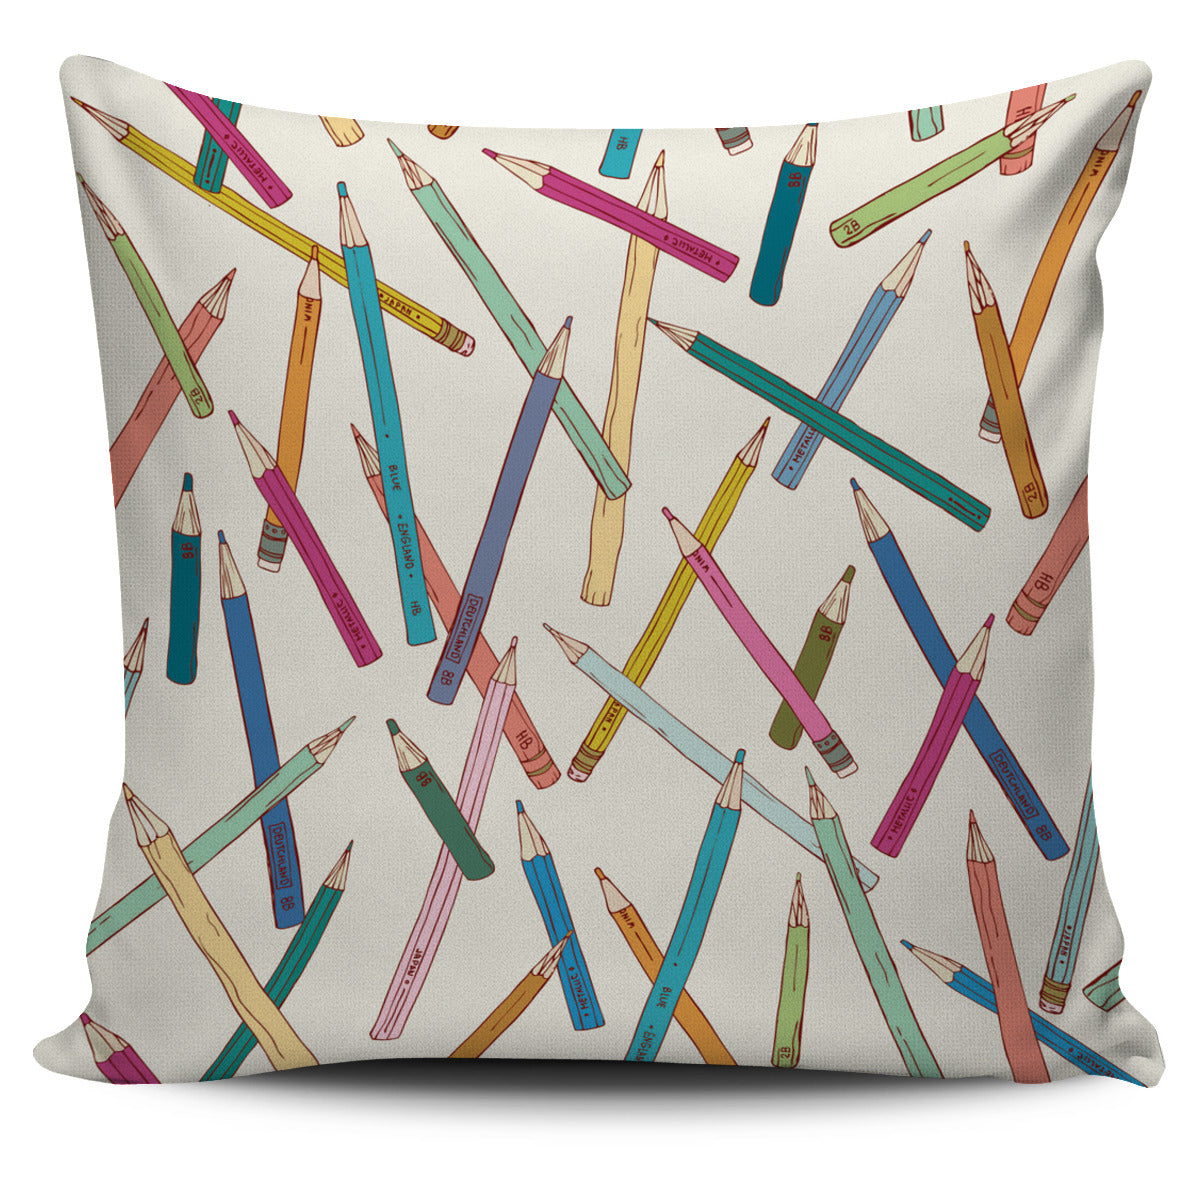 Pencil Me In Pillow Cover